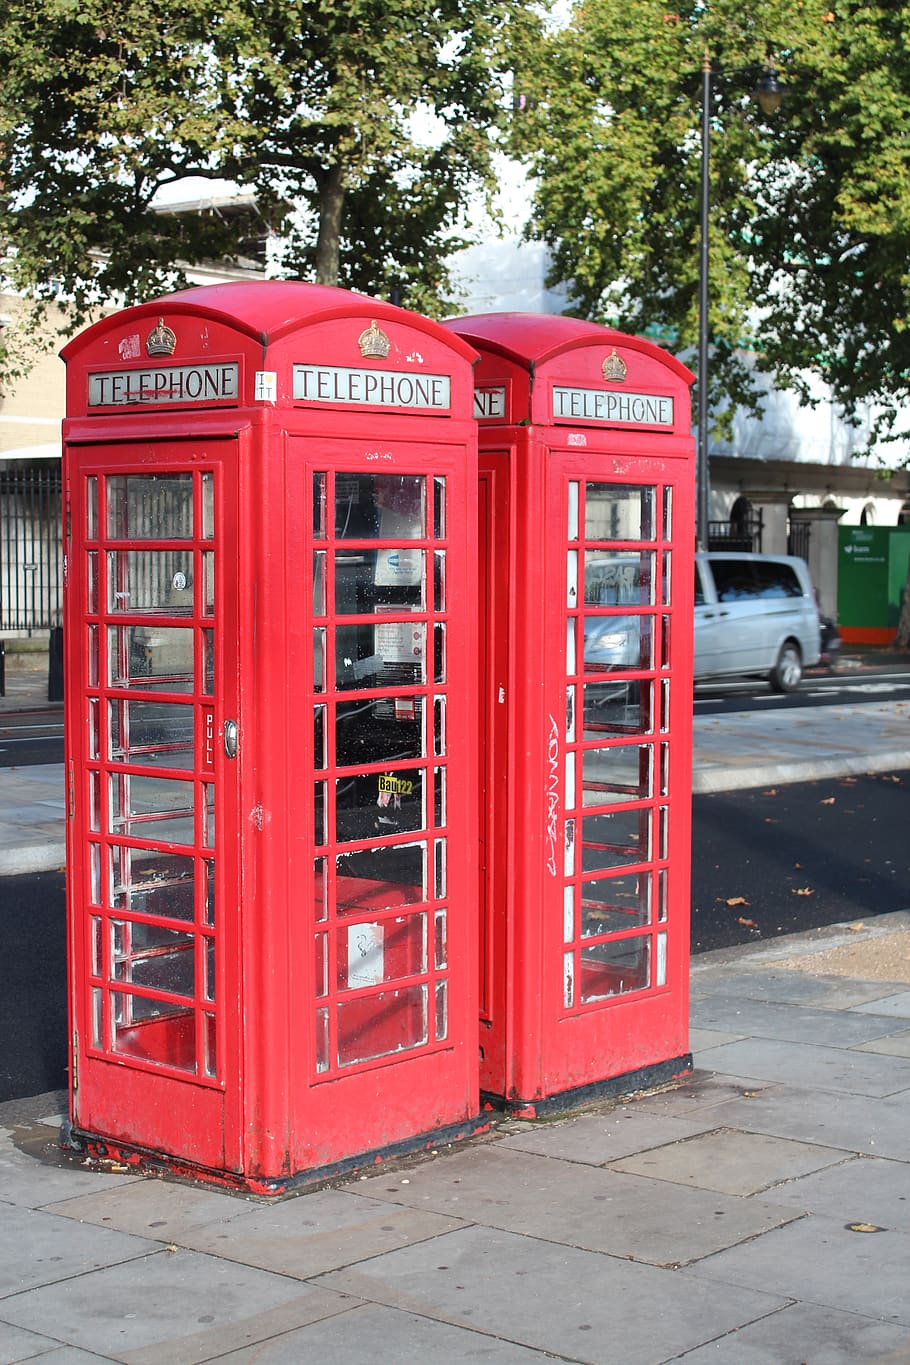 phone booth, london, england, red, red telephone box, british